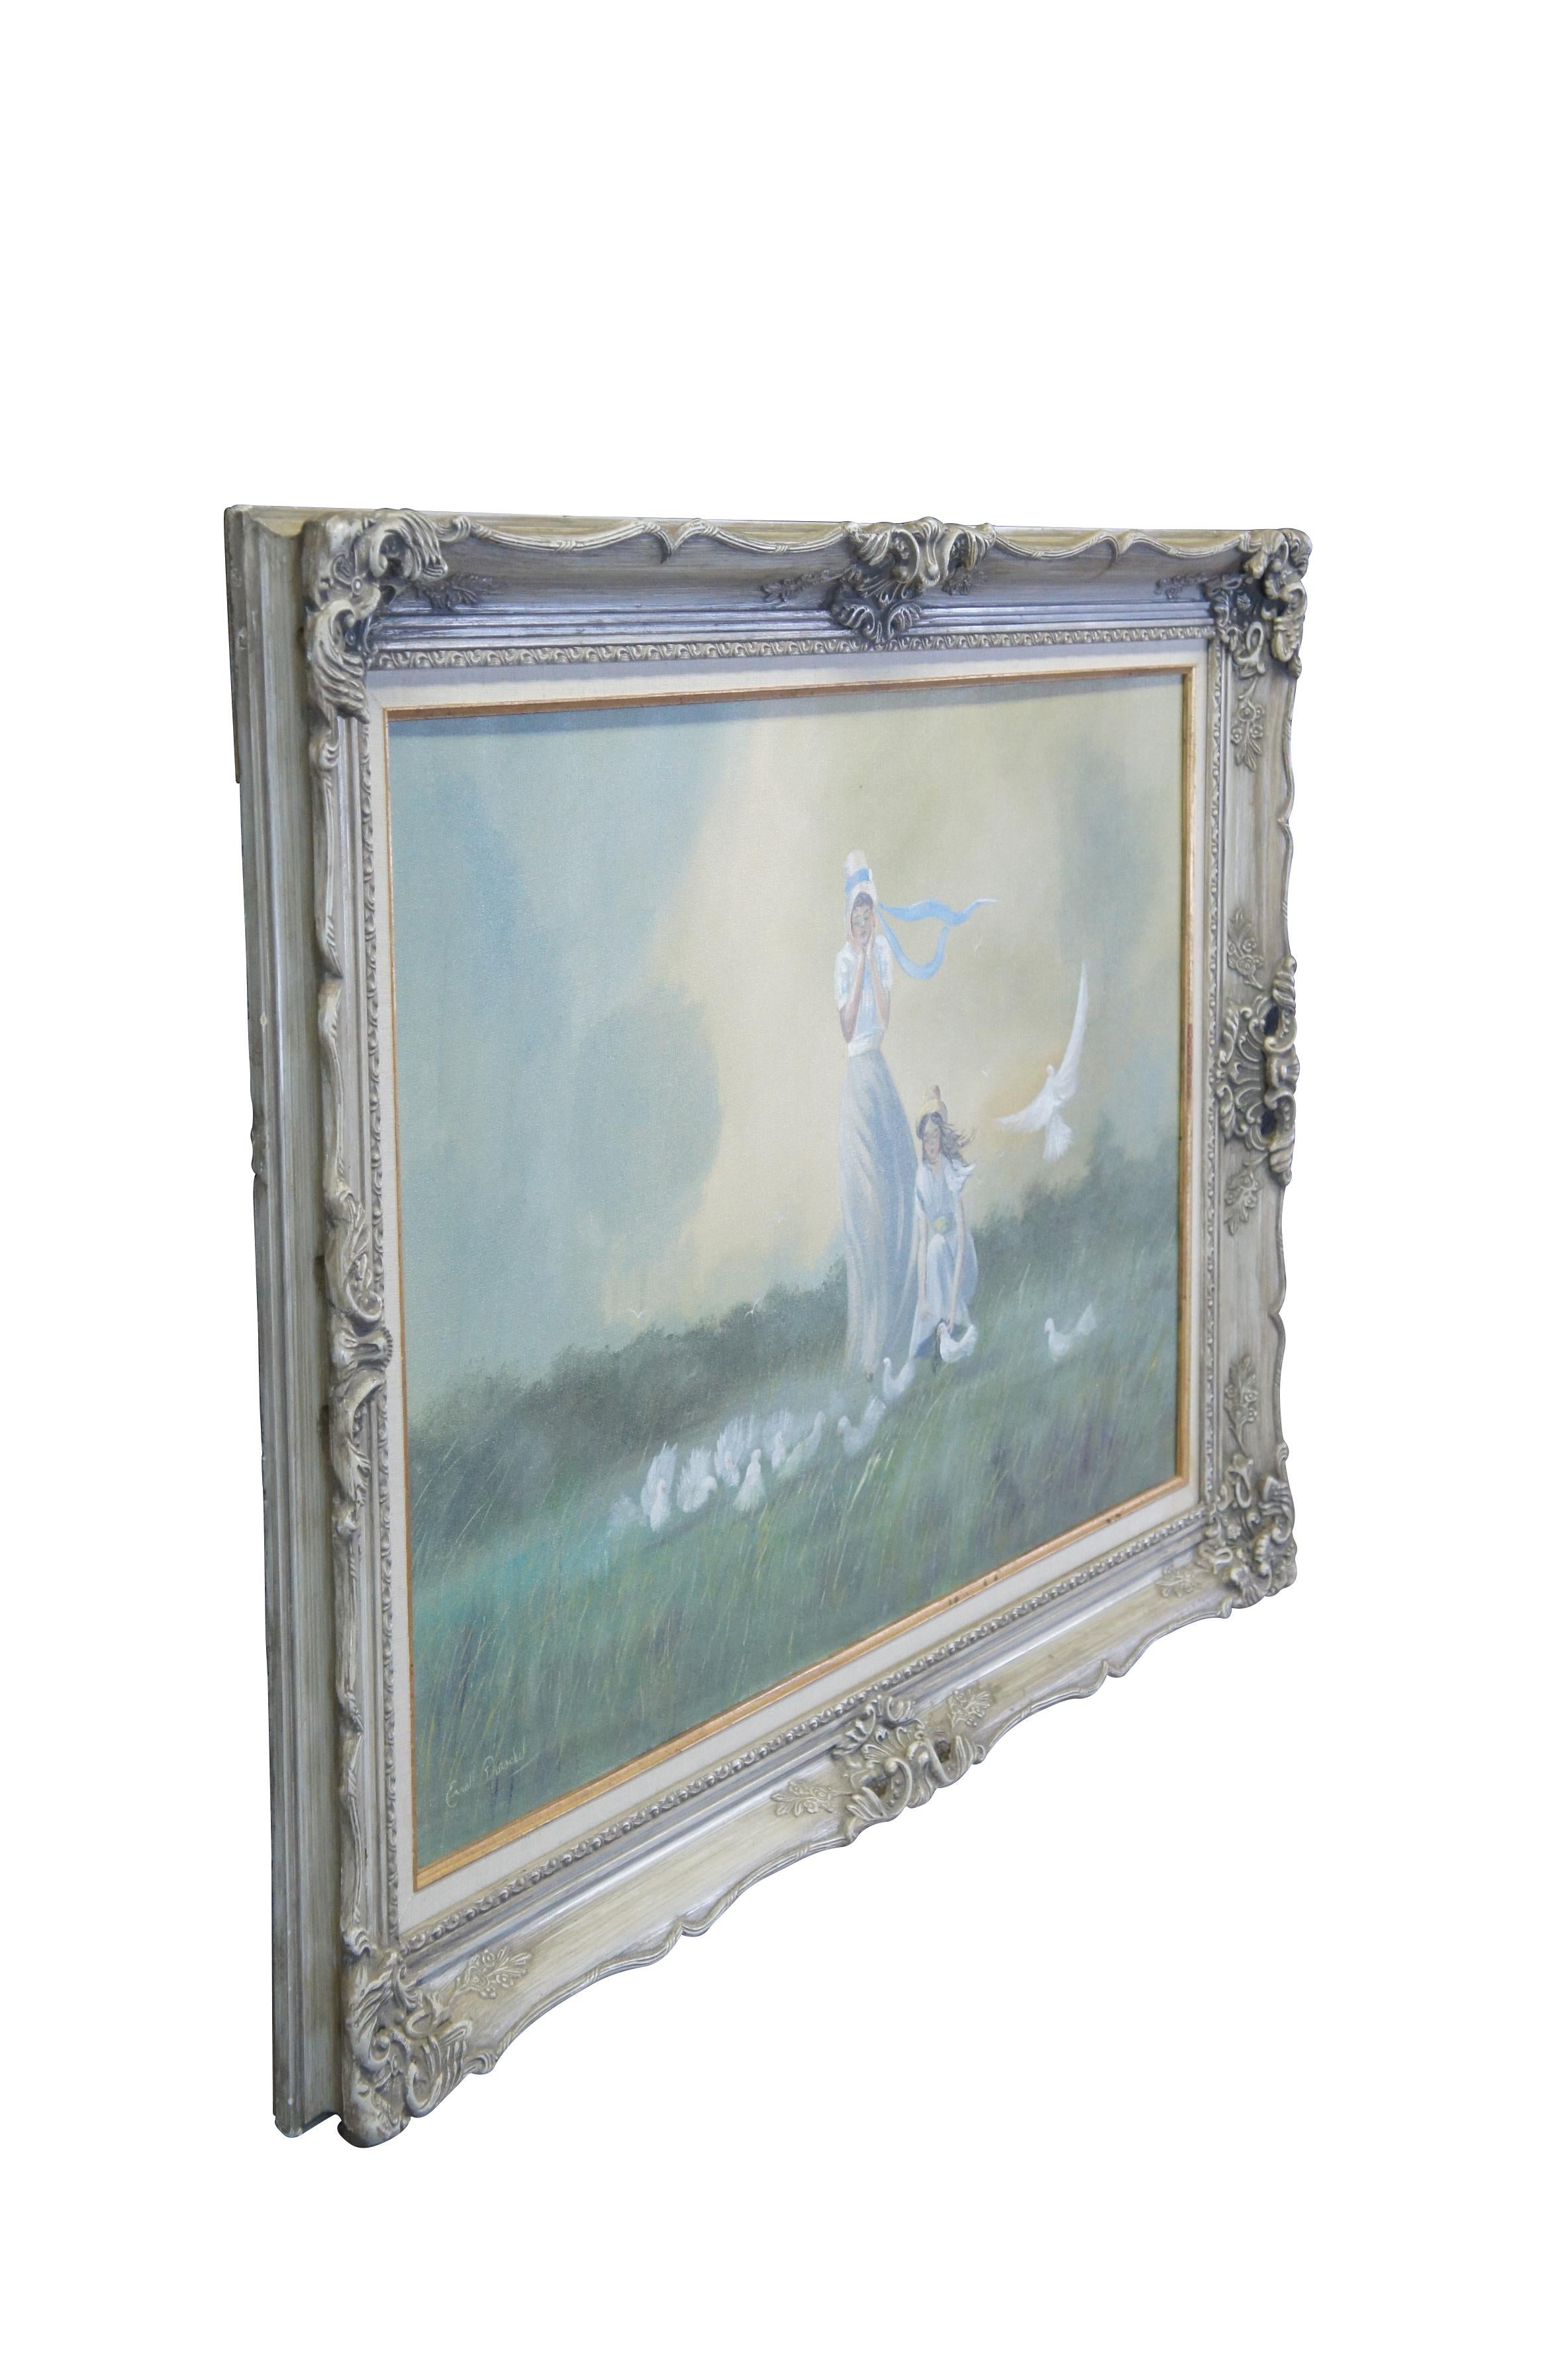 Vintage Erroll Dorschel original landscape oil painting on canvas.  Featuring two girls walking through the prairie with birds / doves.  Framed in scalloped baroque frame. 

Born in Rochester NY of Dutch decent.   He studied in Los Angeles with many